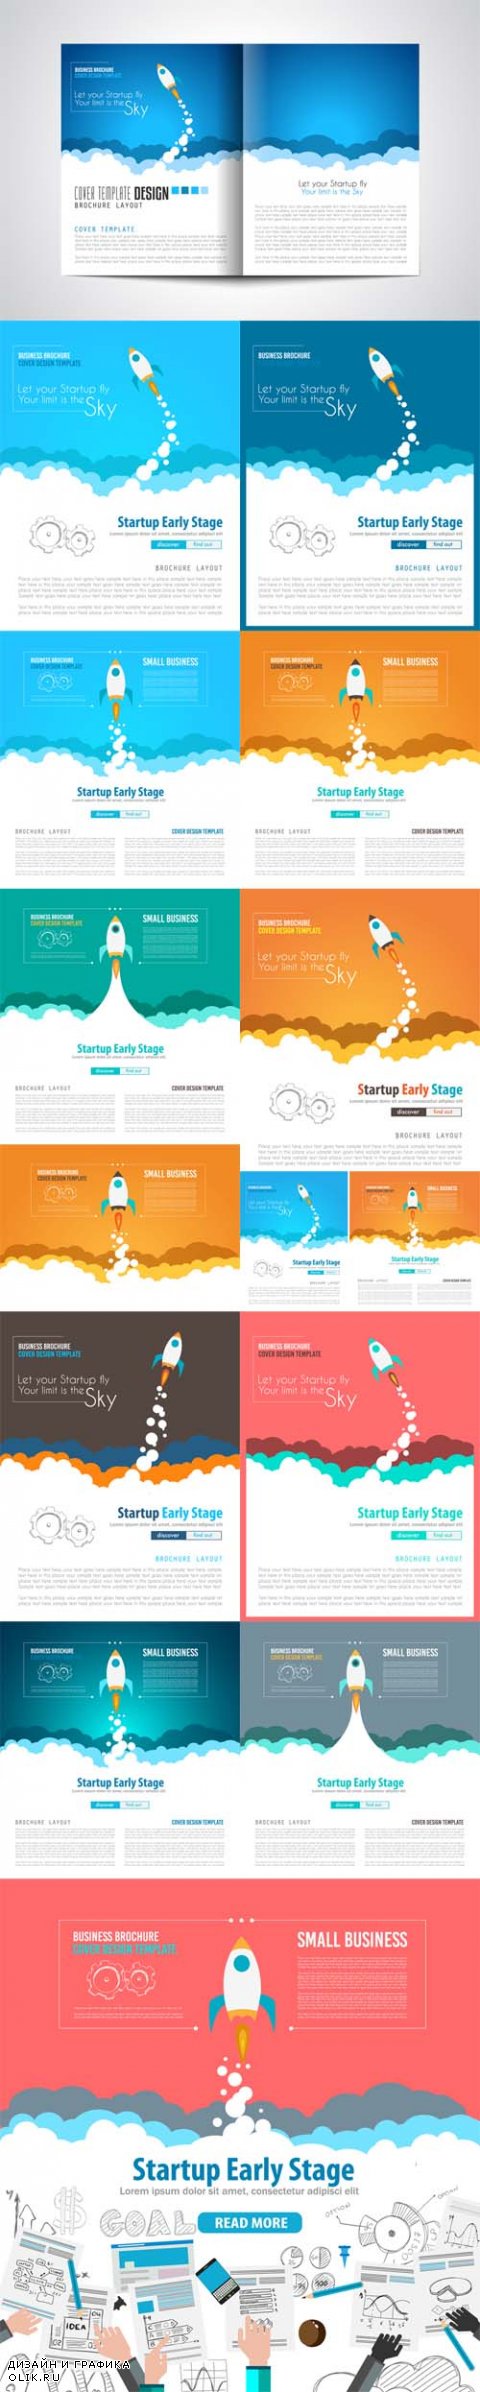 Vector Startup Landing Webpage or Corporate Design Covers